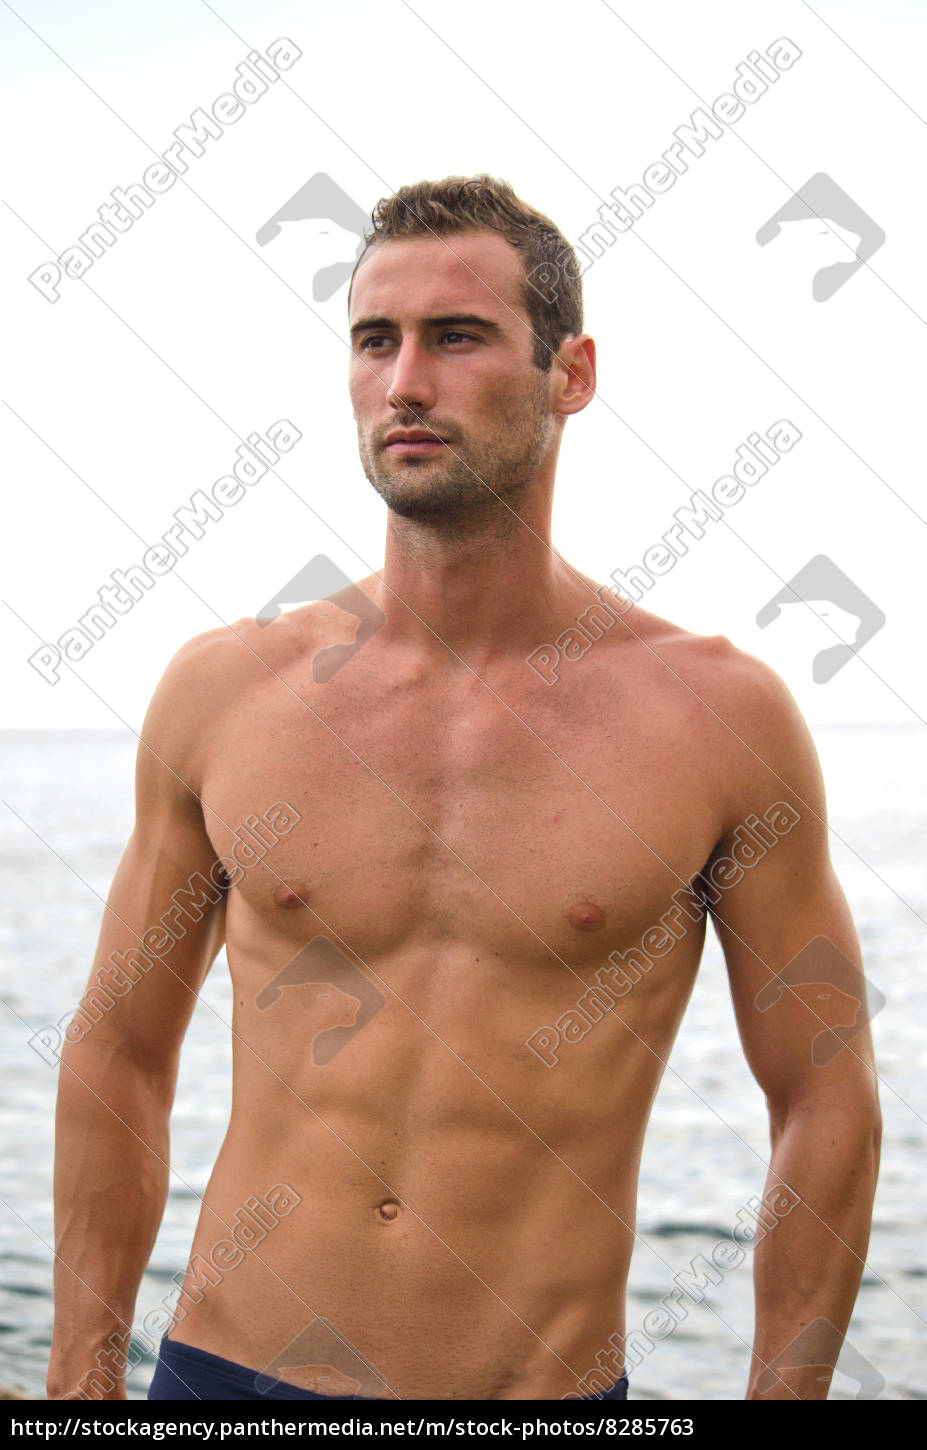 Shirtless Muscular Male Model With Sea Behind Royalty Free Image